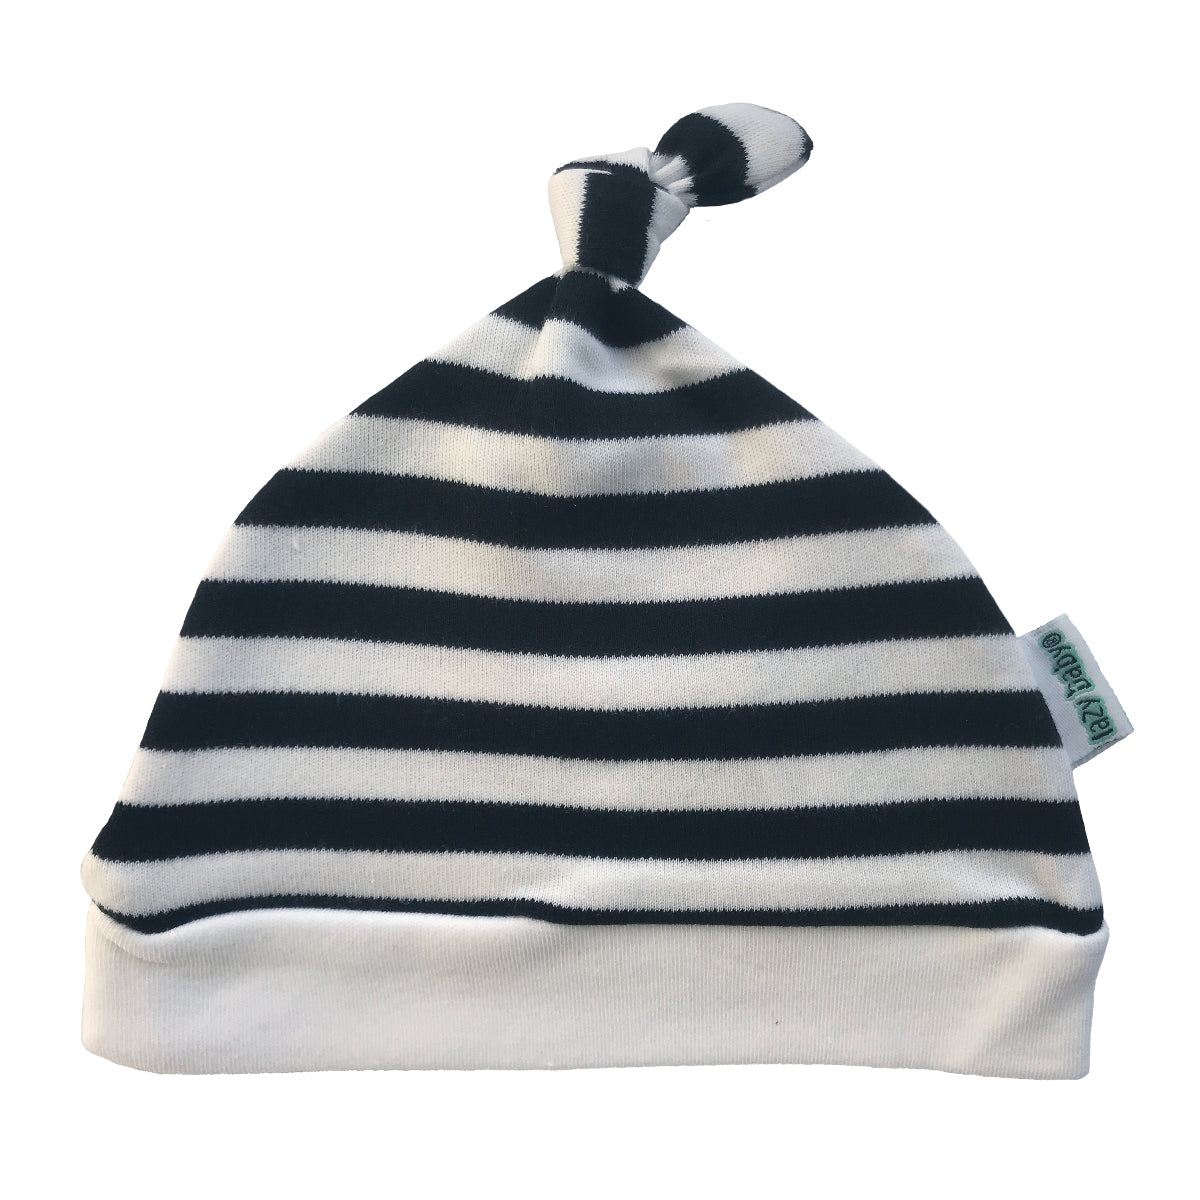 Black and white stripy hat with knot detail at the top